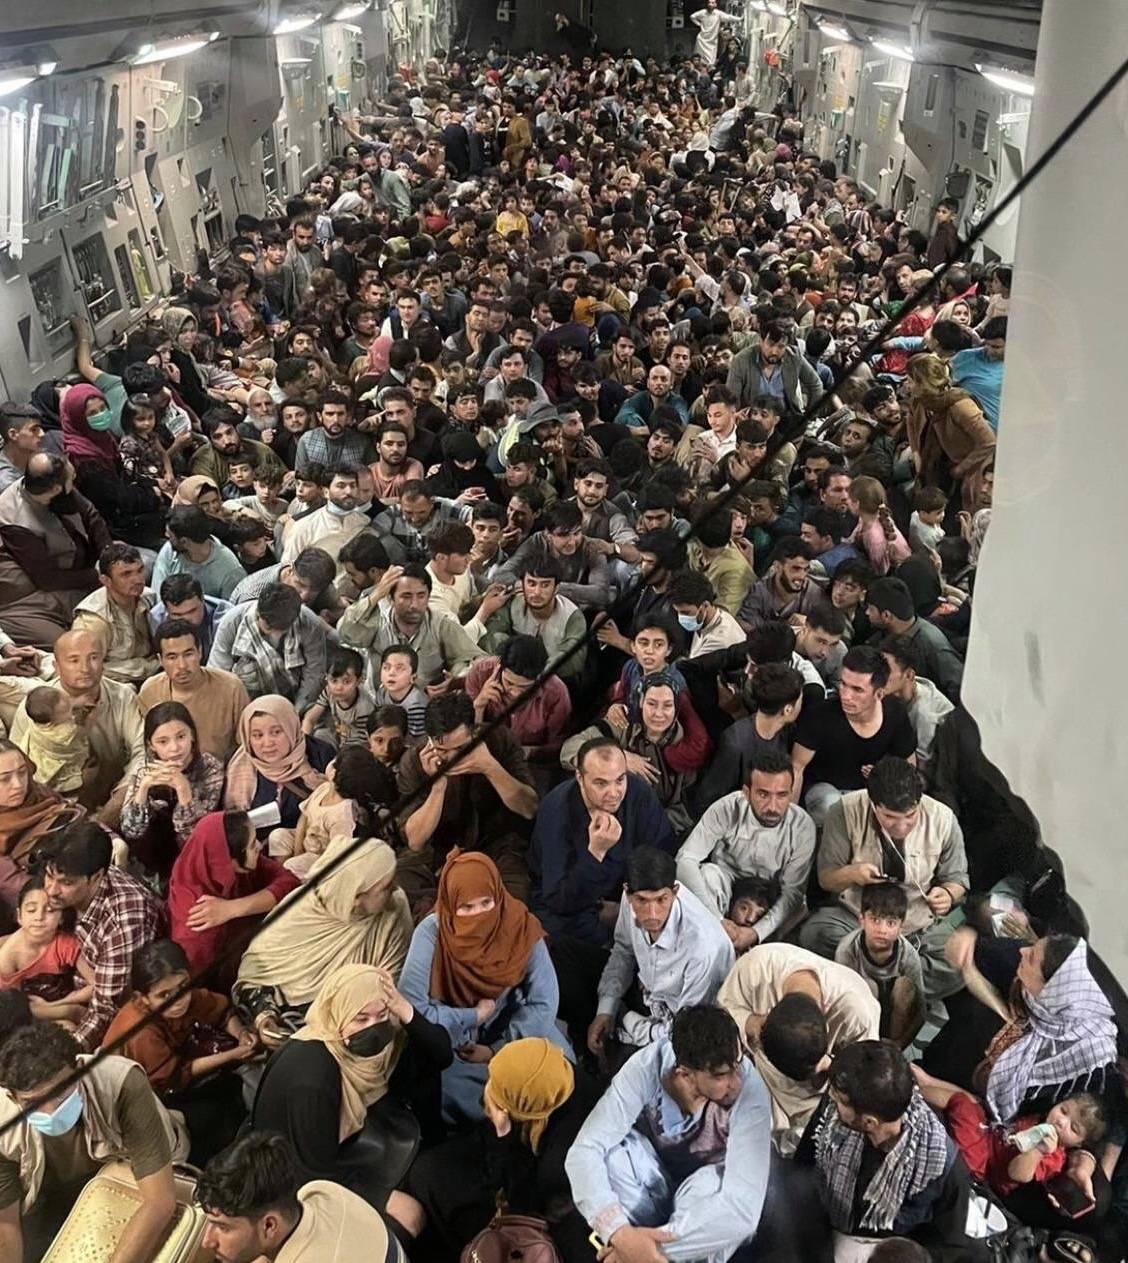 Surprising photos show 640 Afghans packed into fleeing US Air Force plane